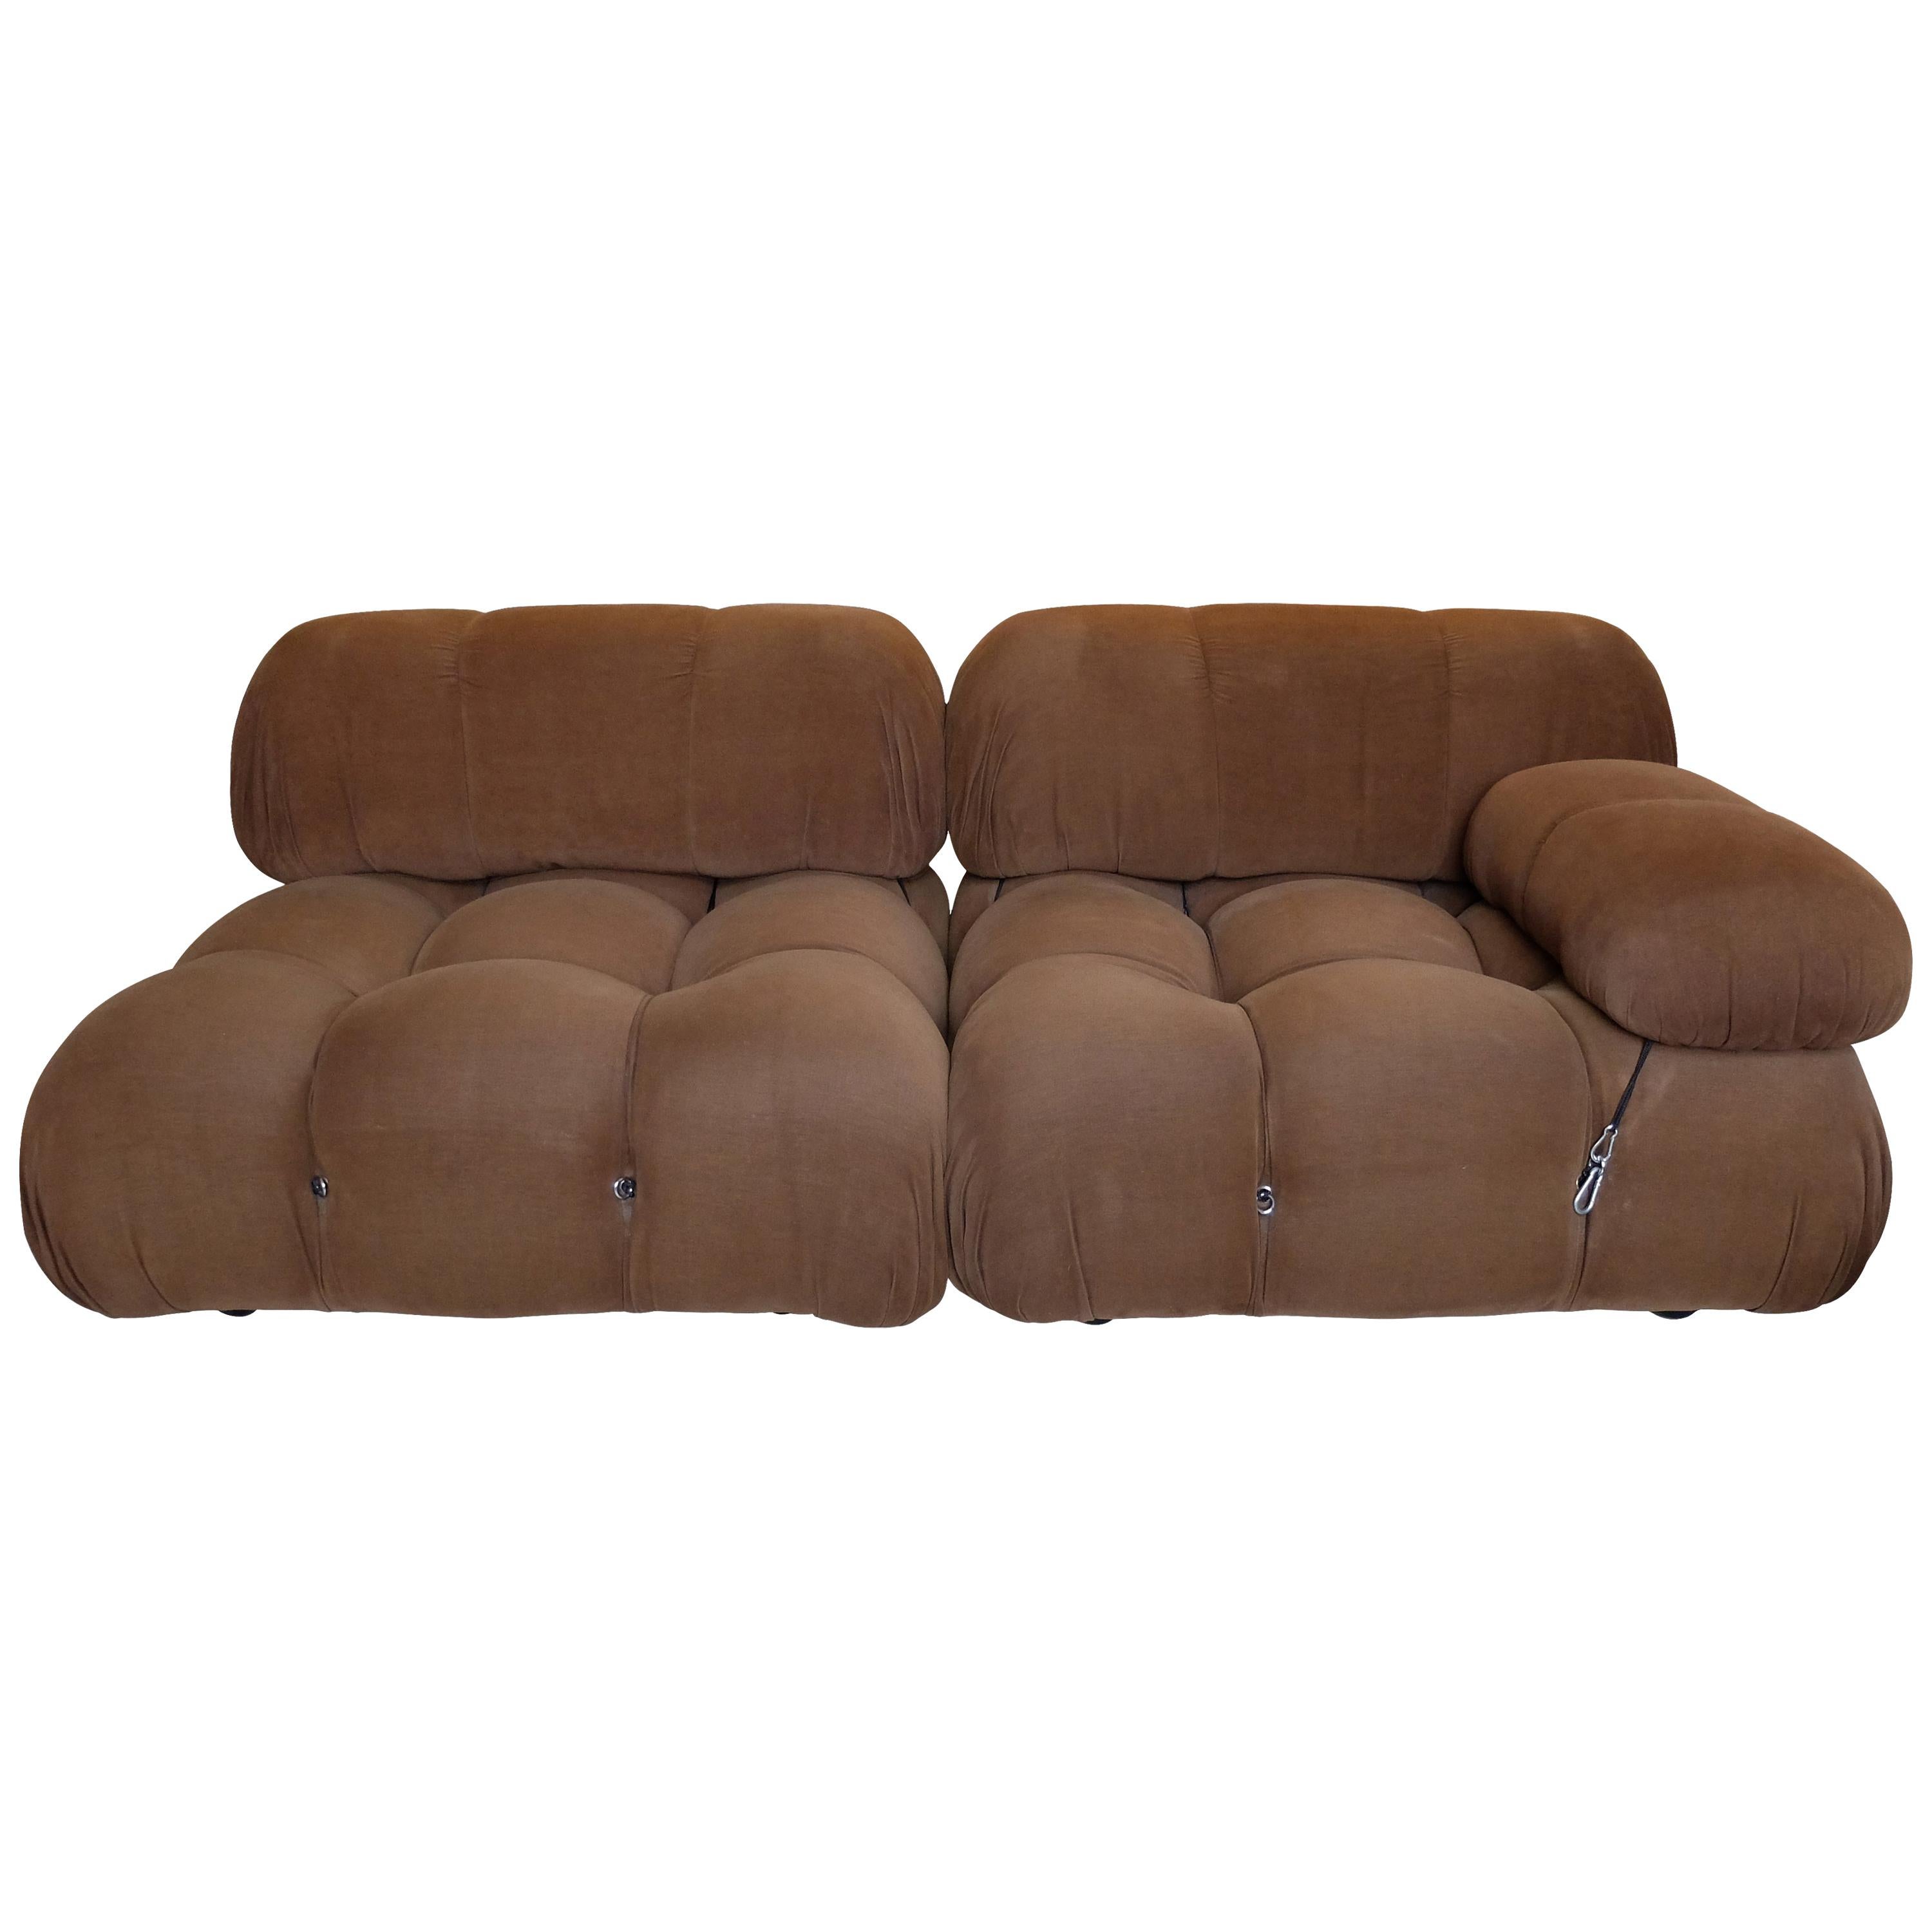 BB Italia Furniture Chairs Sofas Tables More 146 For Sale At